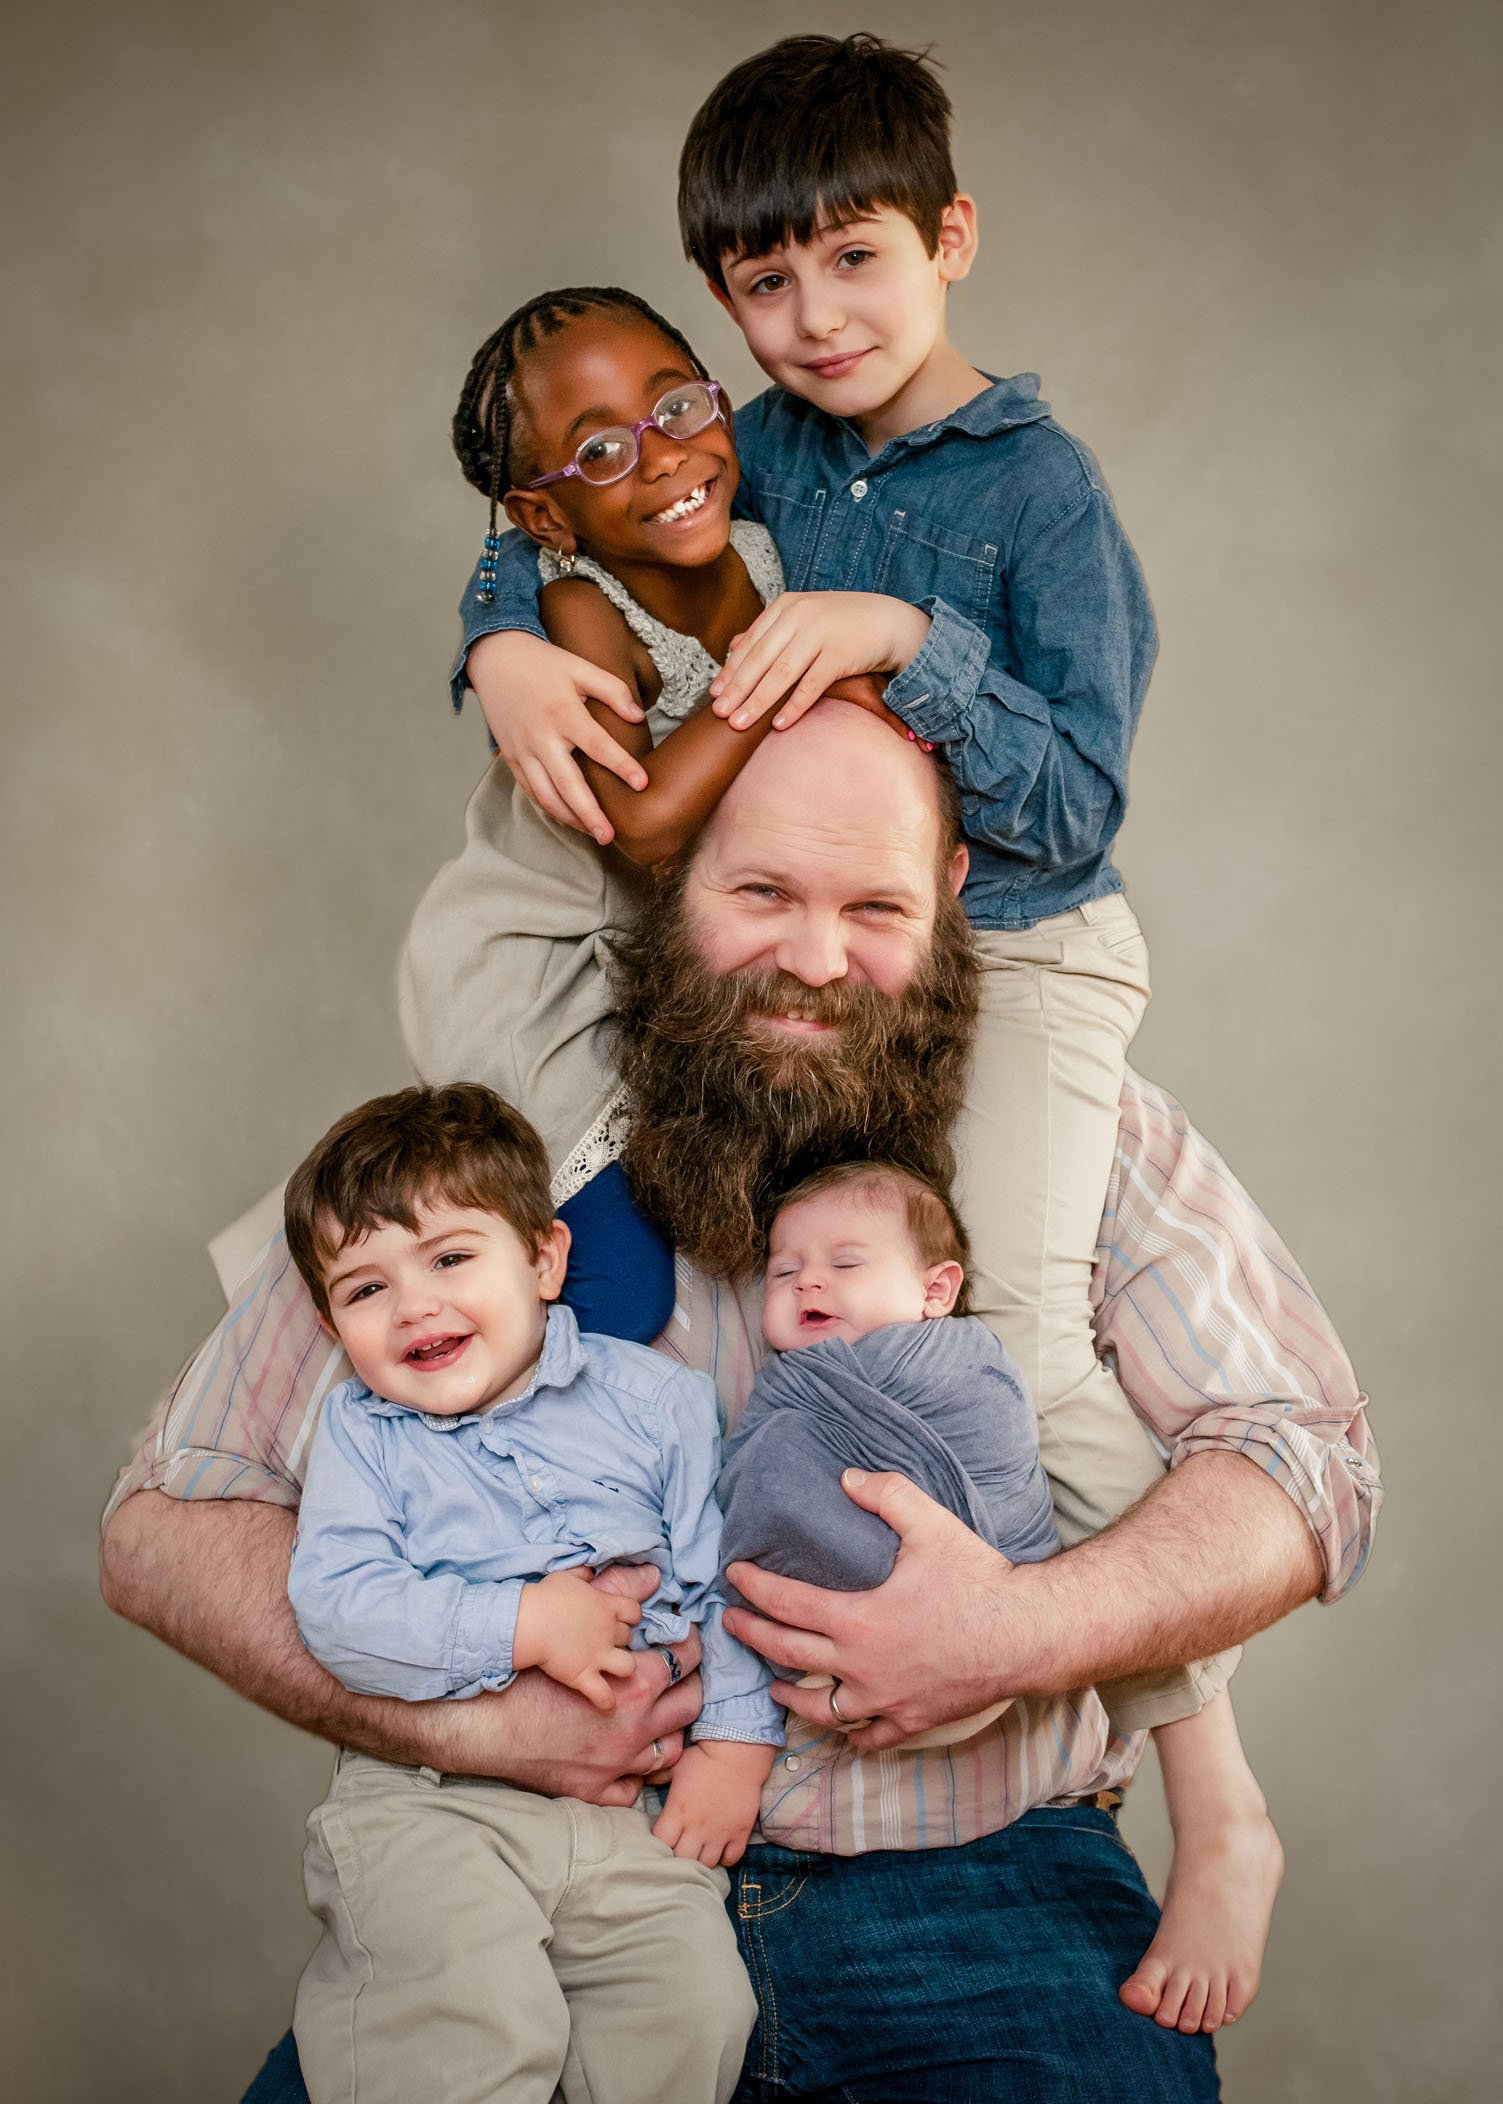 Daddy tree or kids draped all over their Dad while holding a newborn baby